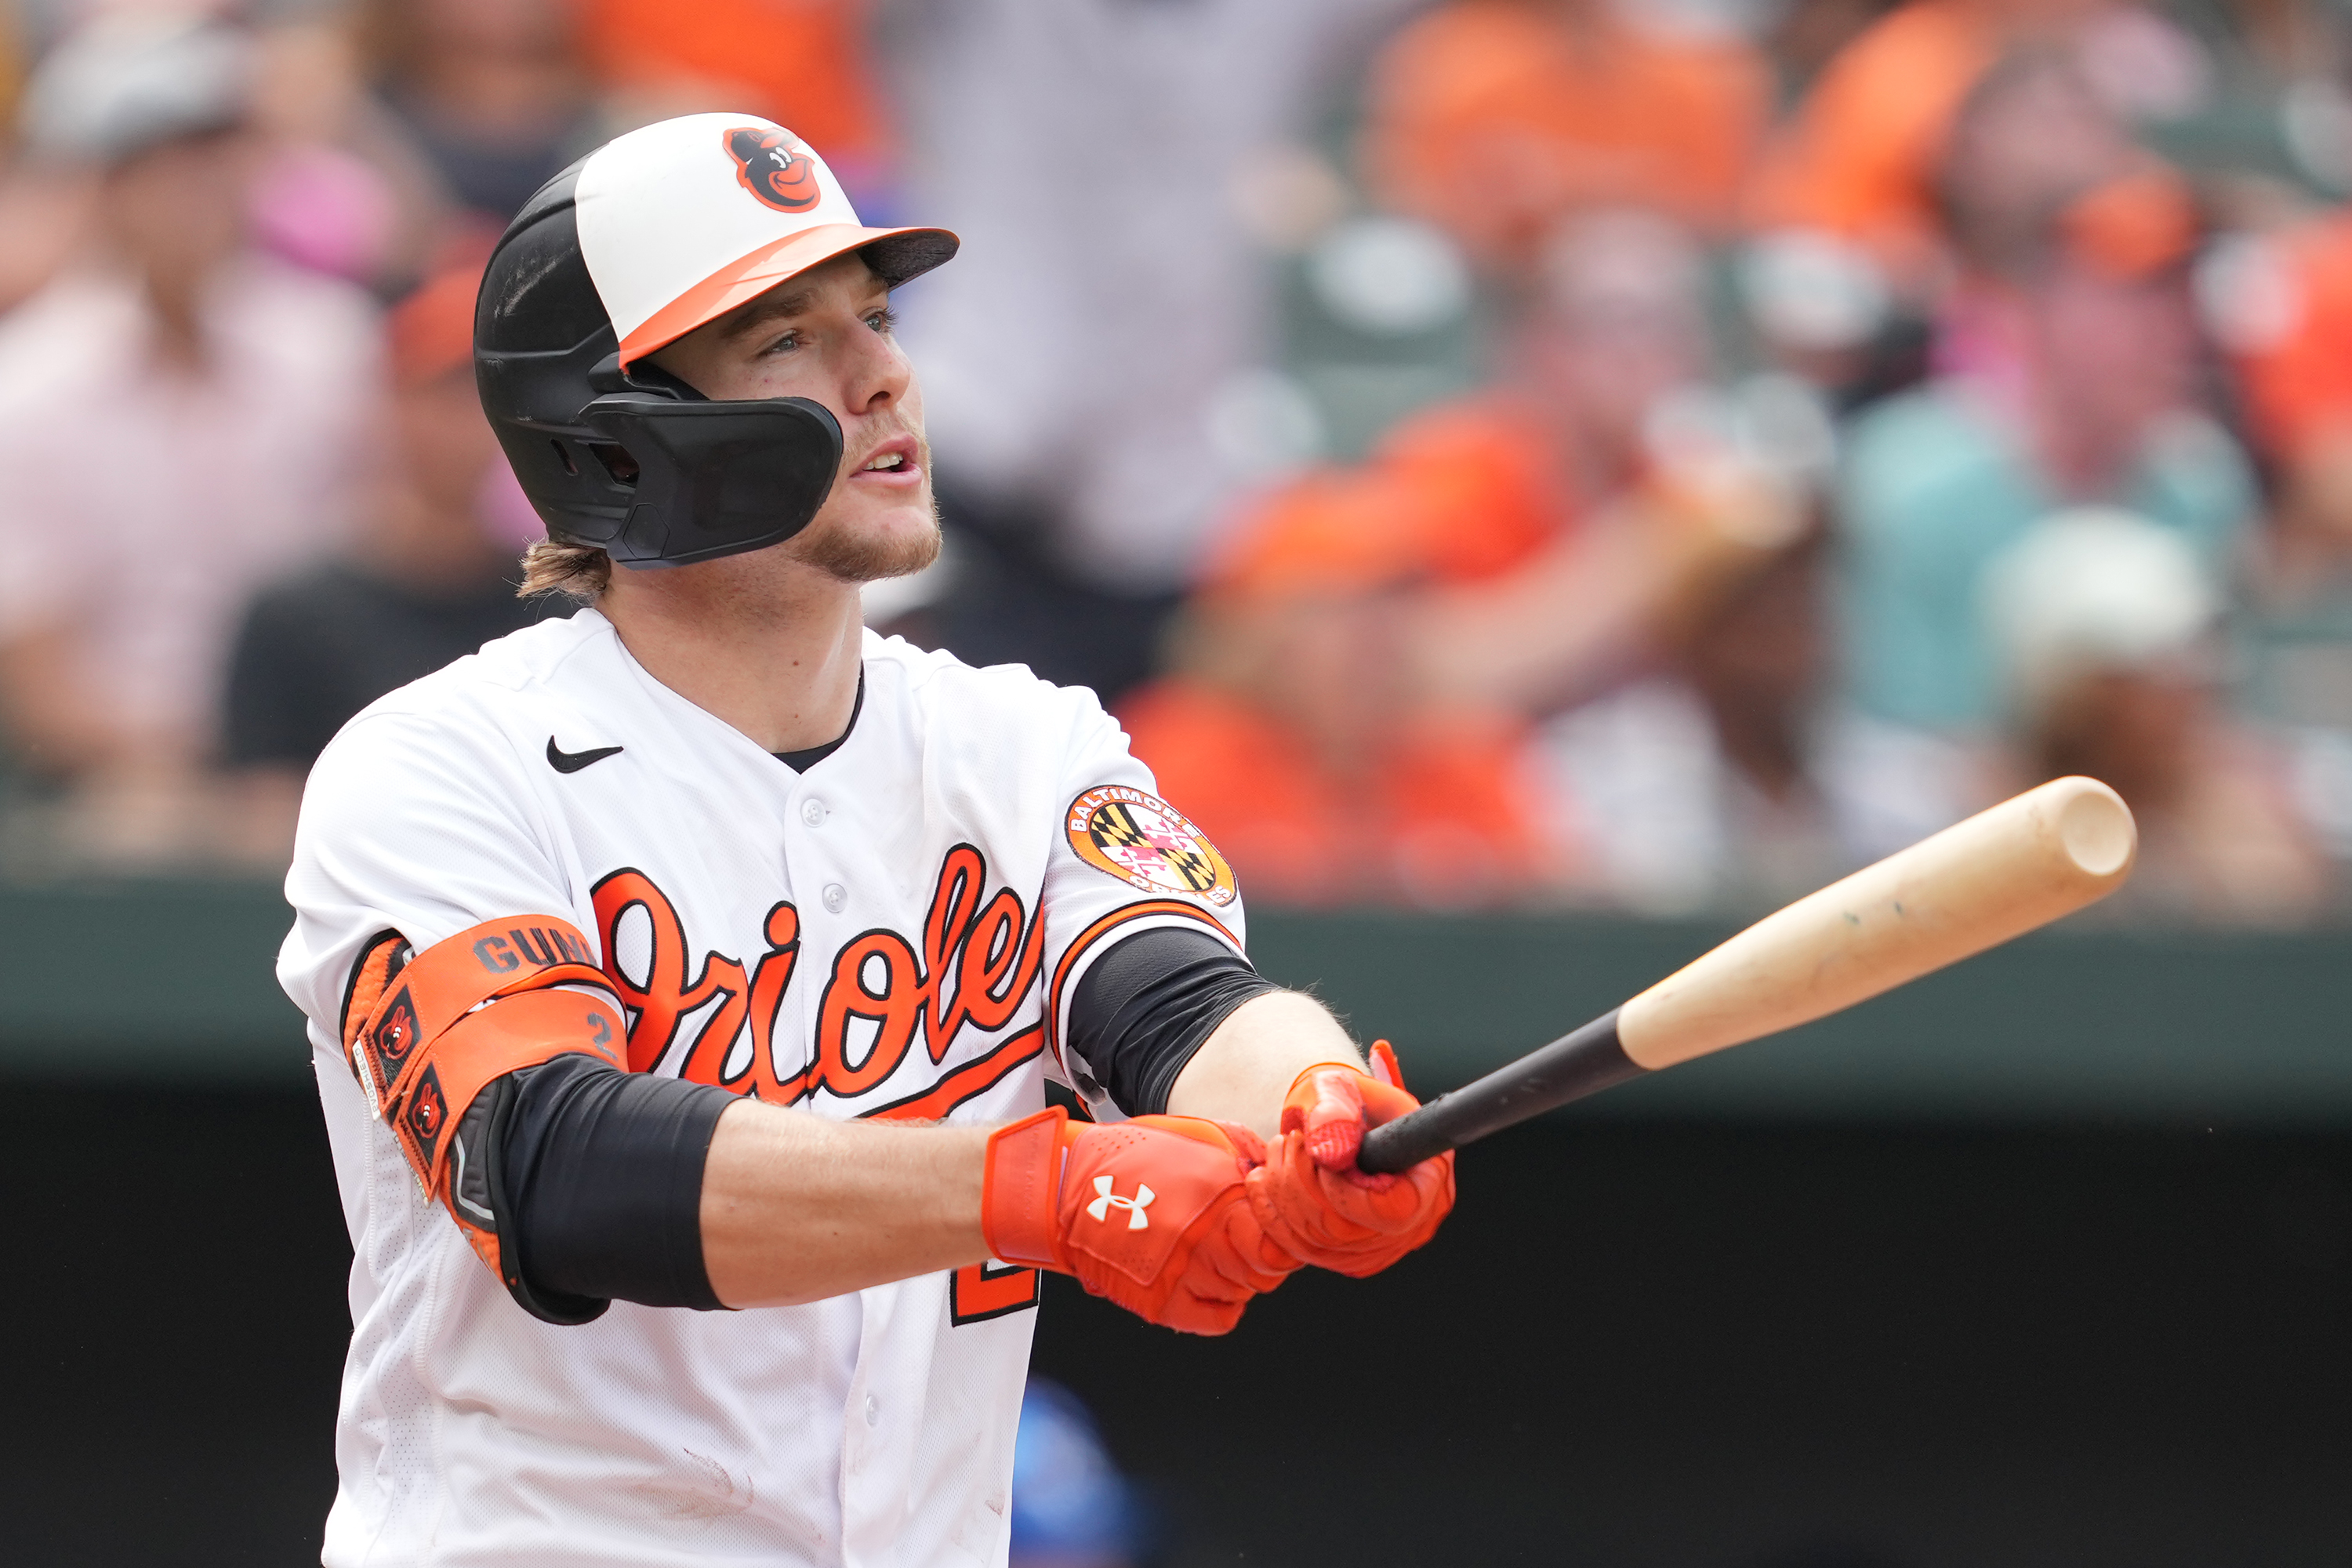 O's All-Time Leaders at Memorial Stadium - Eutaw Street Report